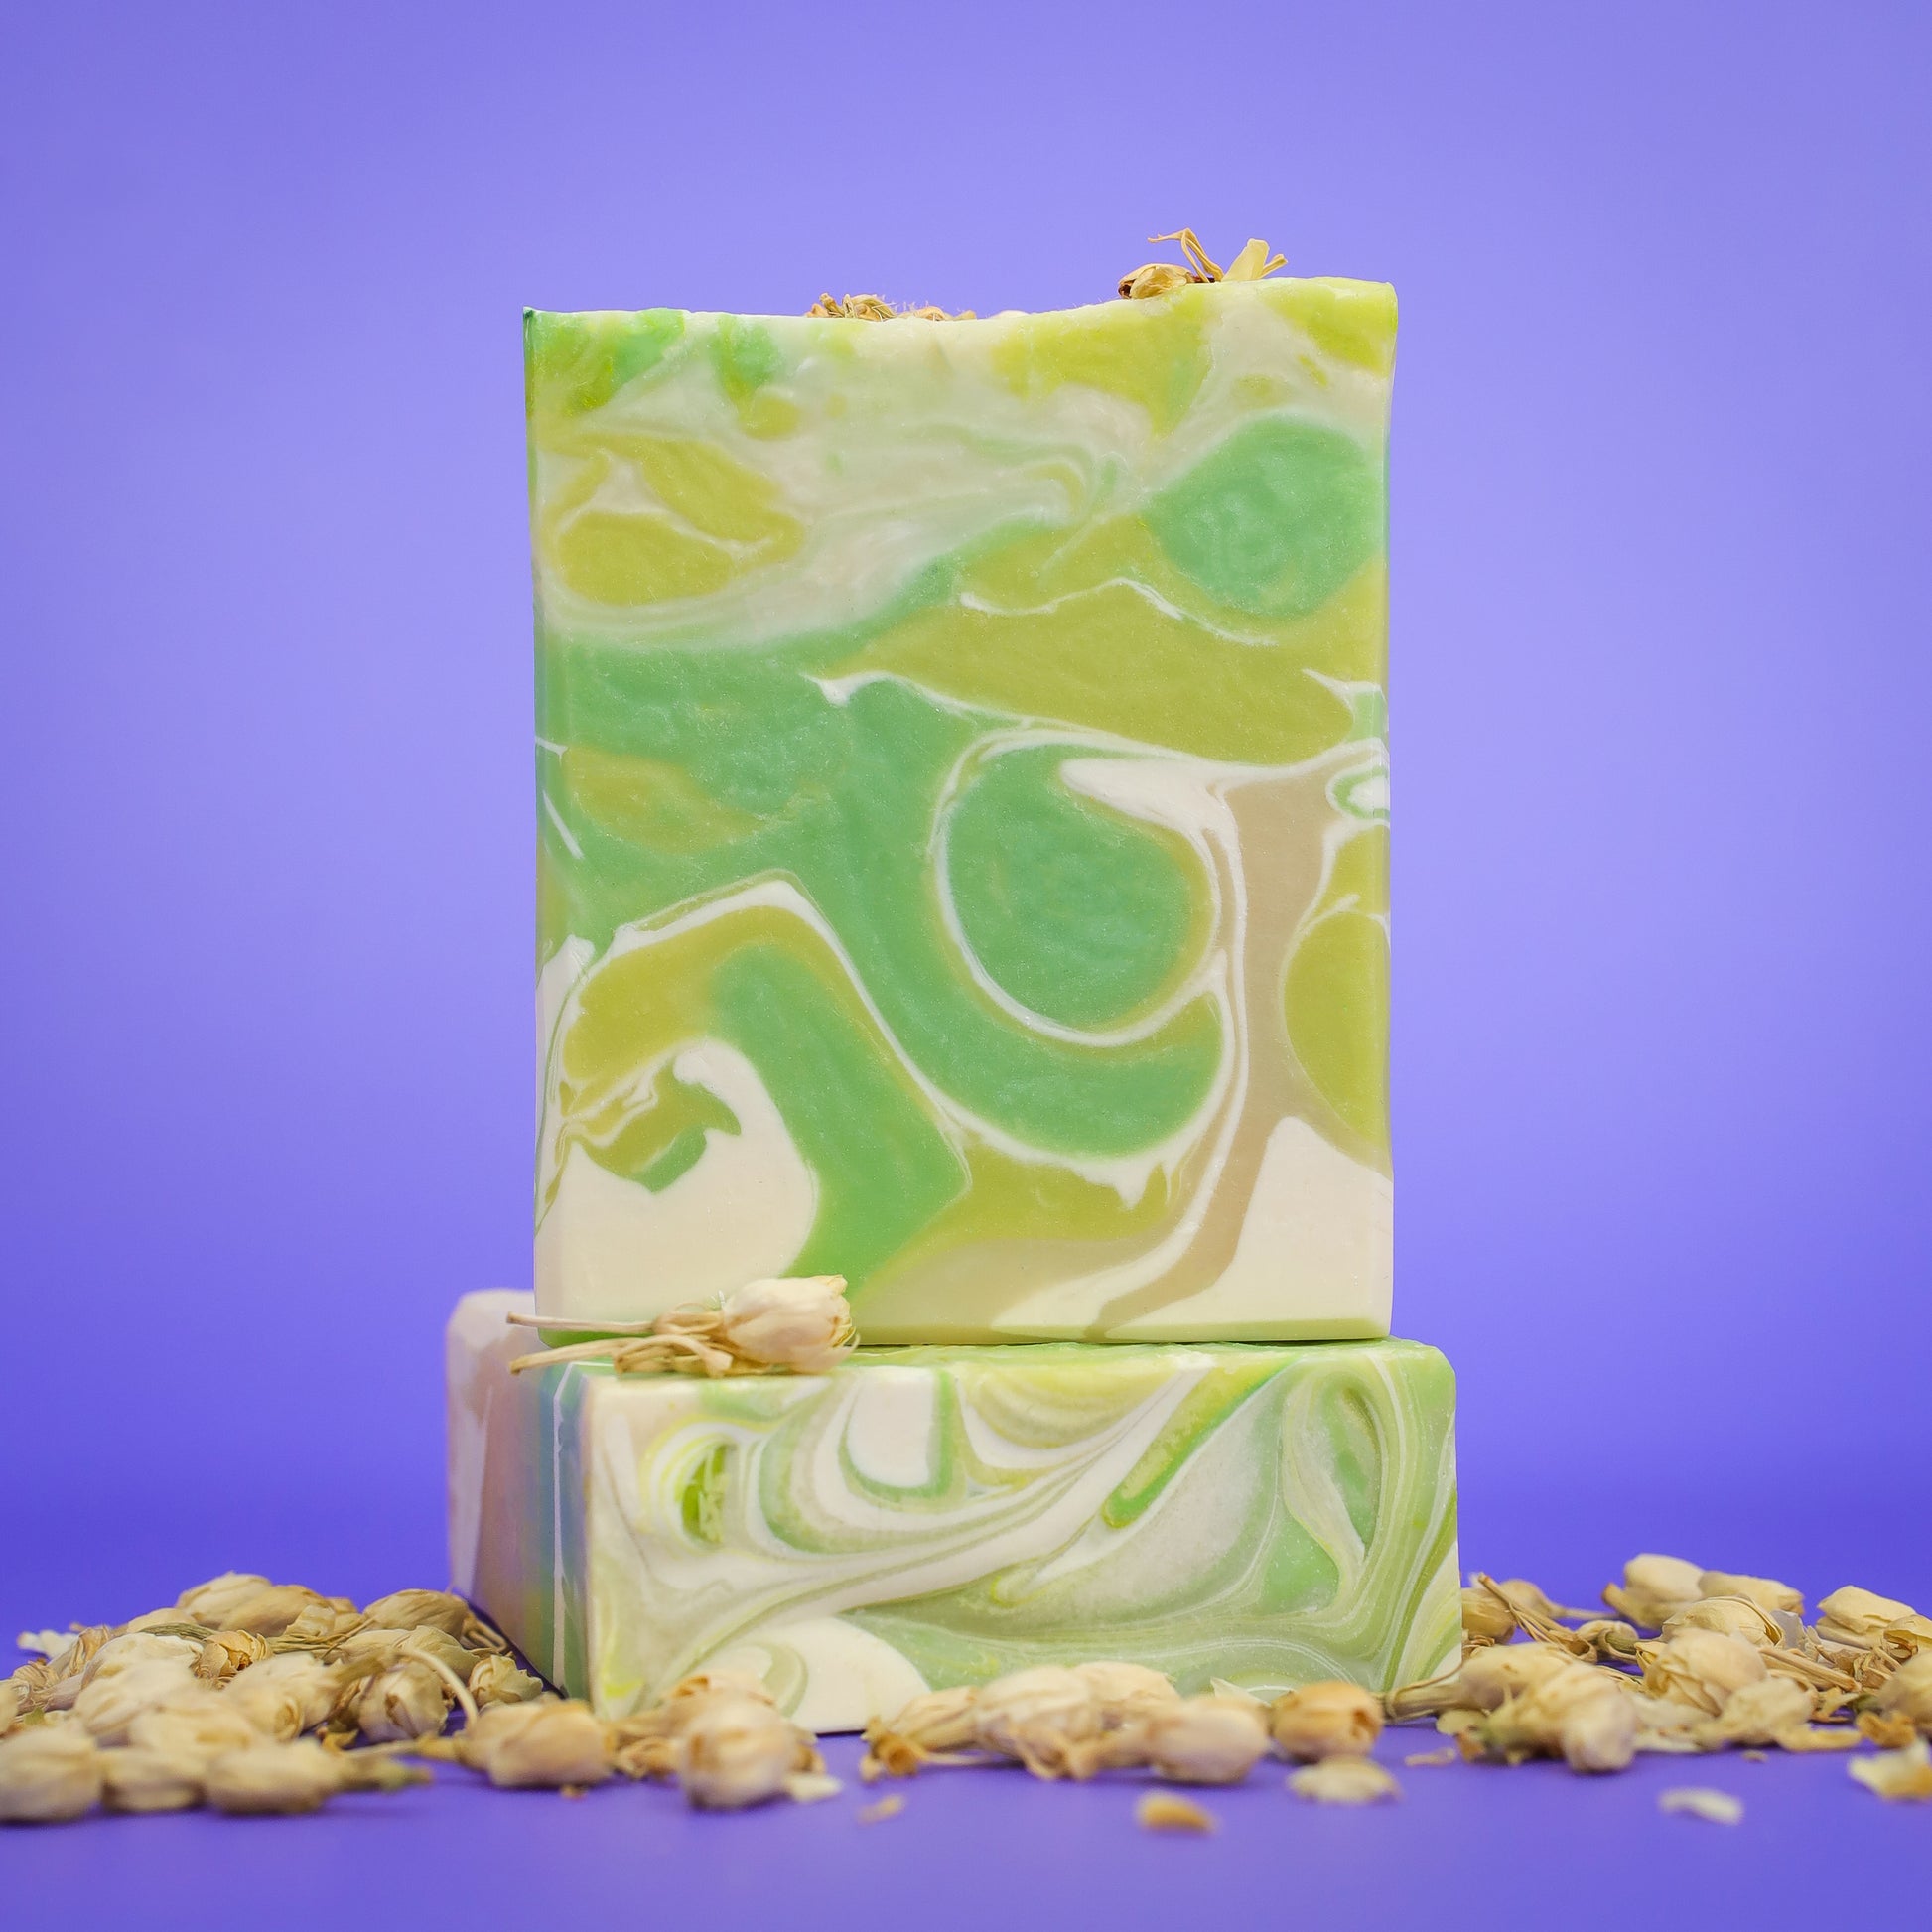 Witch's Brew - Neroli and White Jasmine Natural Signature Soap, Birds of Valhalla, Facial Soap, Birds of Valhalla